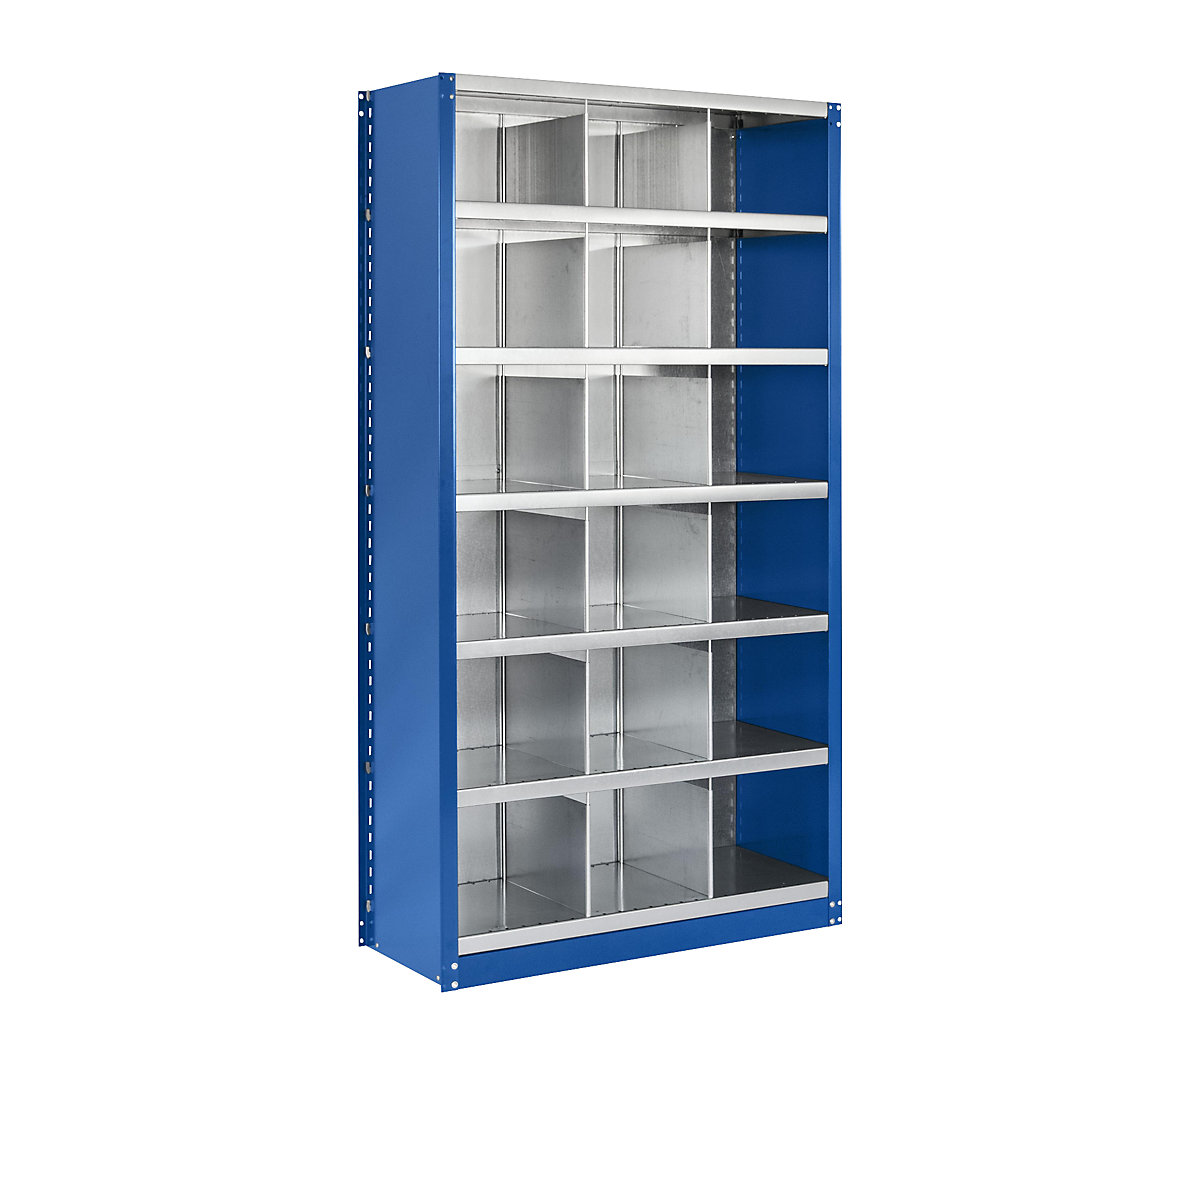 Rayonnage emboîtable modulaire, hauteur 1990 mm – eurokraft pro, 18 casiers, l x p 1000 x 400 mm, rayonnage additionnel, bleu gentiane RAL 5010-1